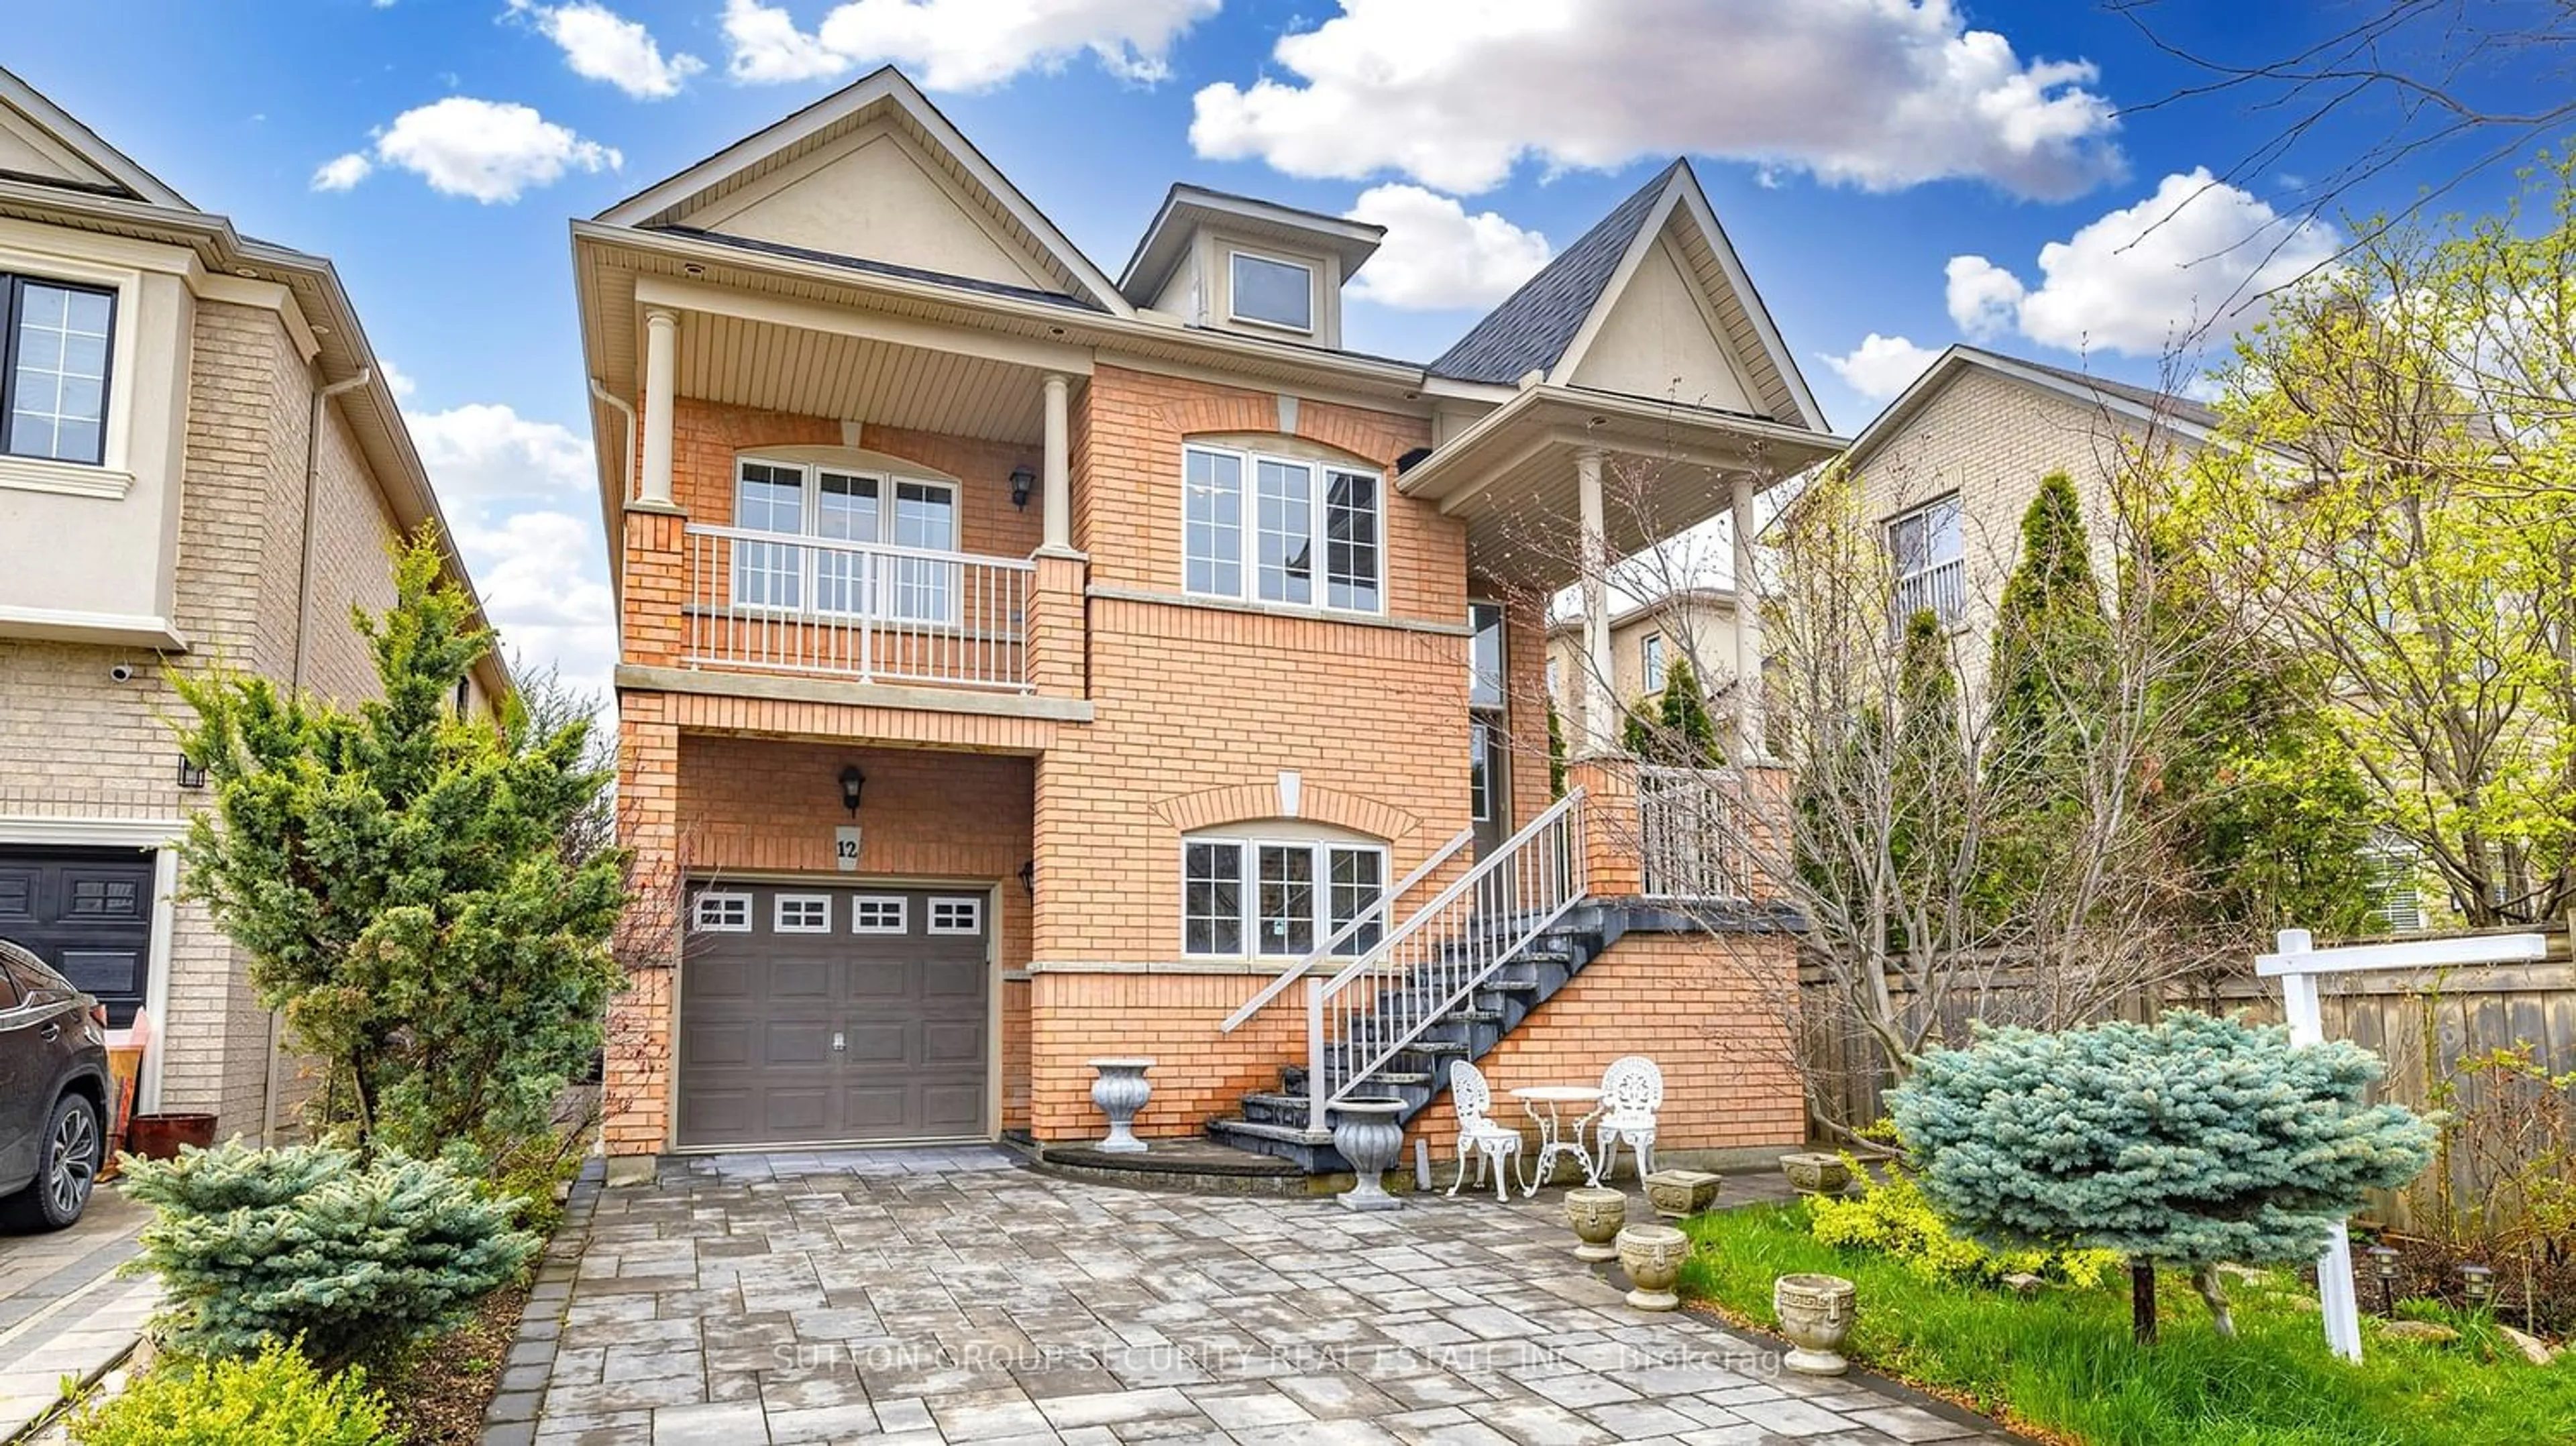 Home with brick exterior material for 12 Maple Forest Dr, Vaughan Ontario L6A 0B7